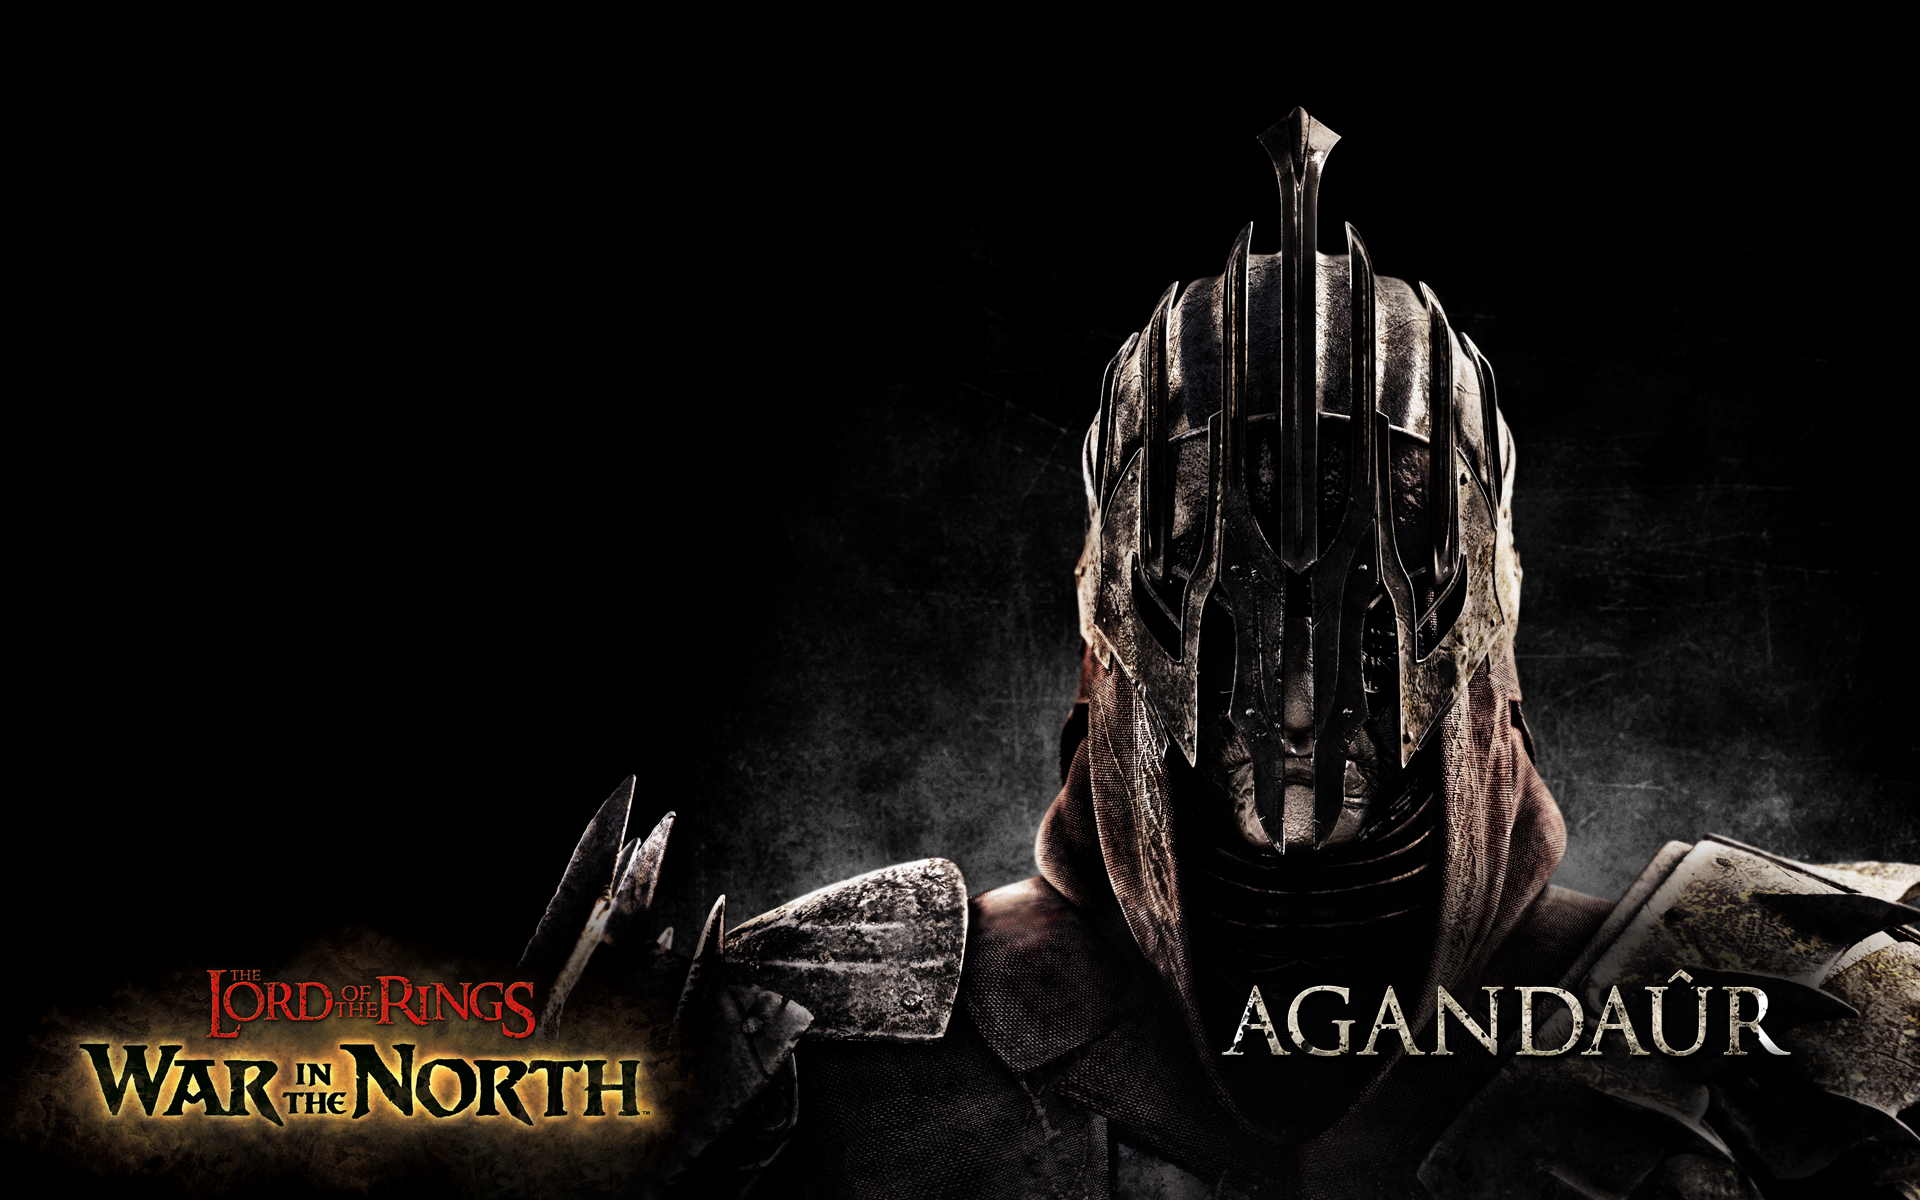 Lord of the rings war in the north steam fix фото 116